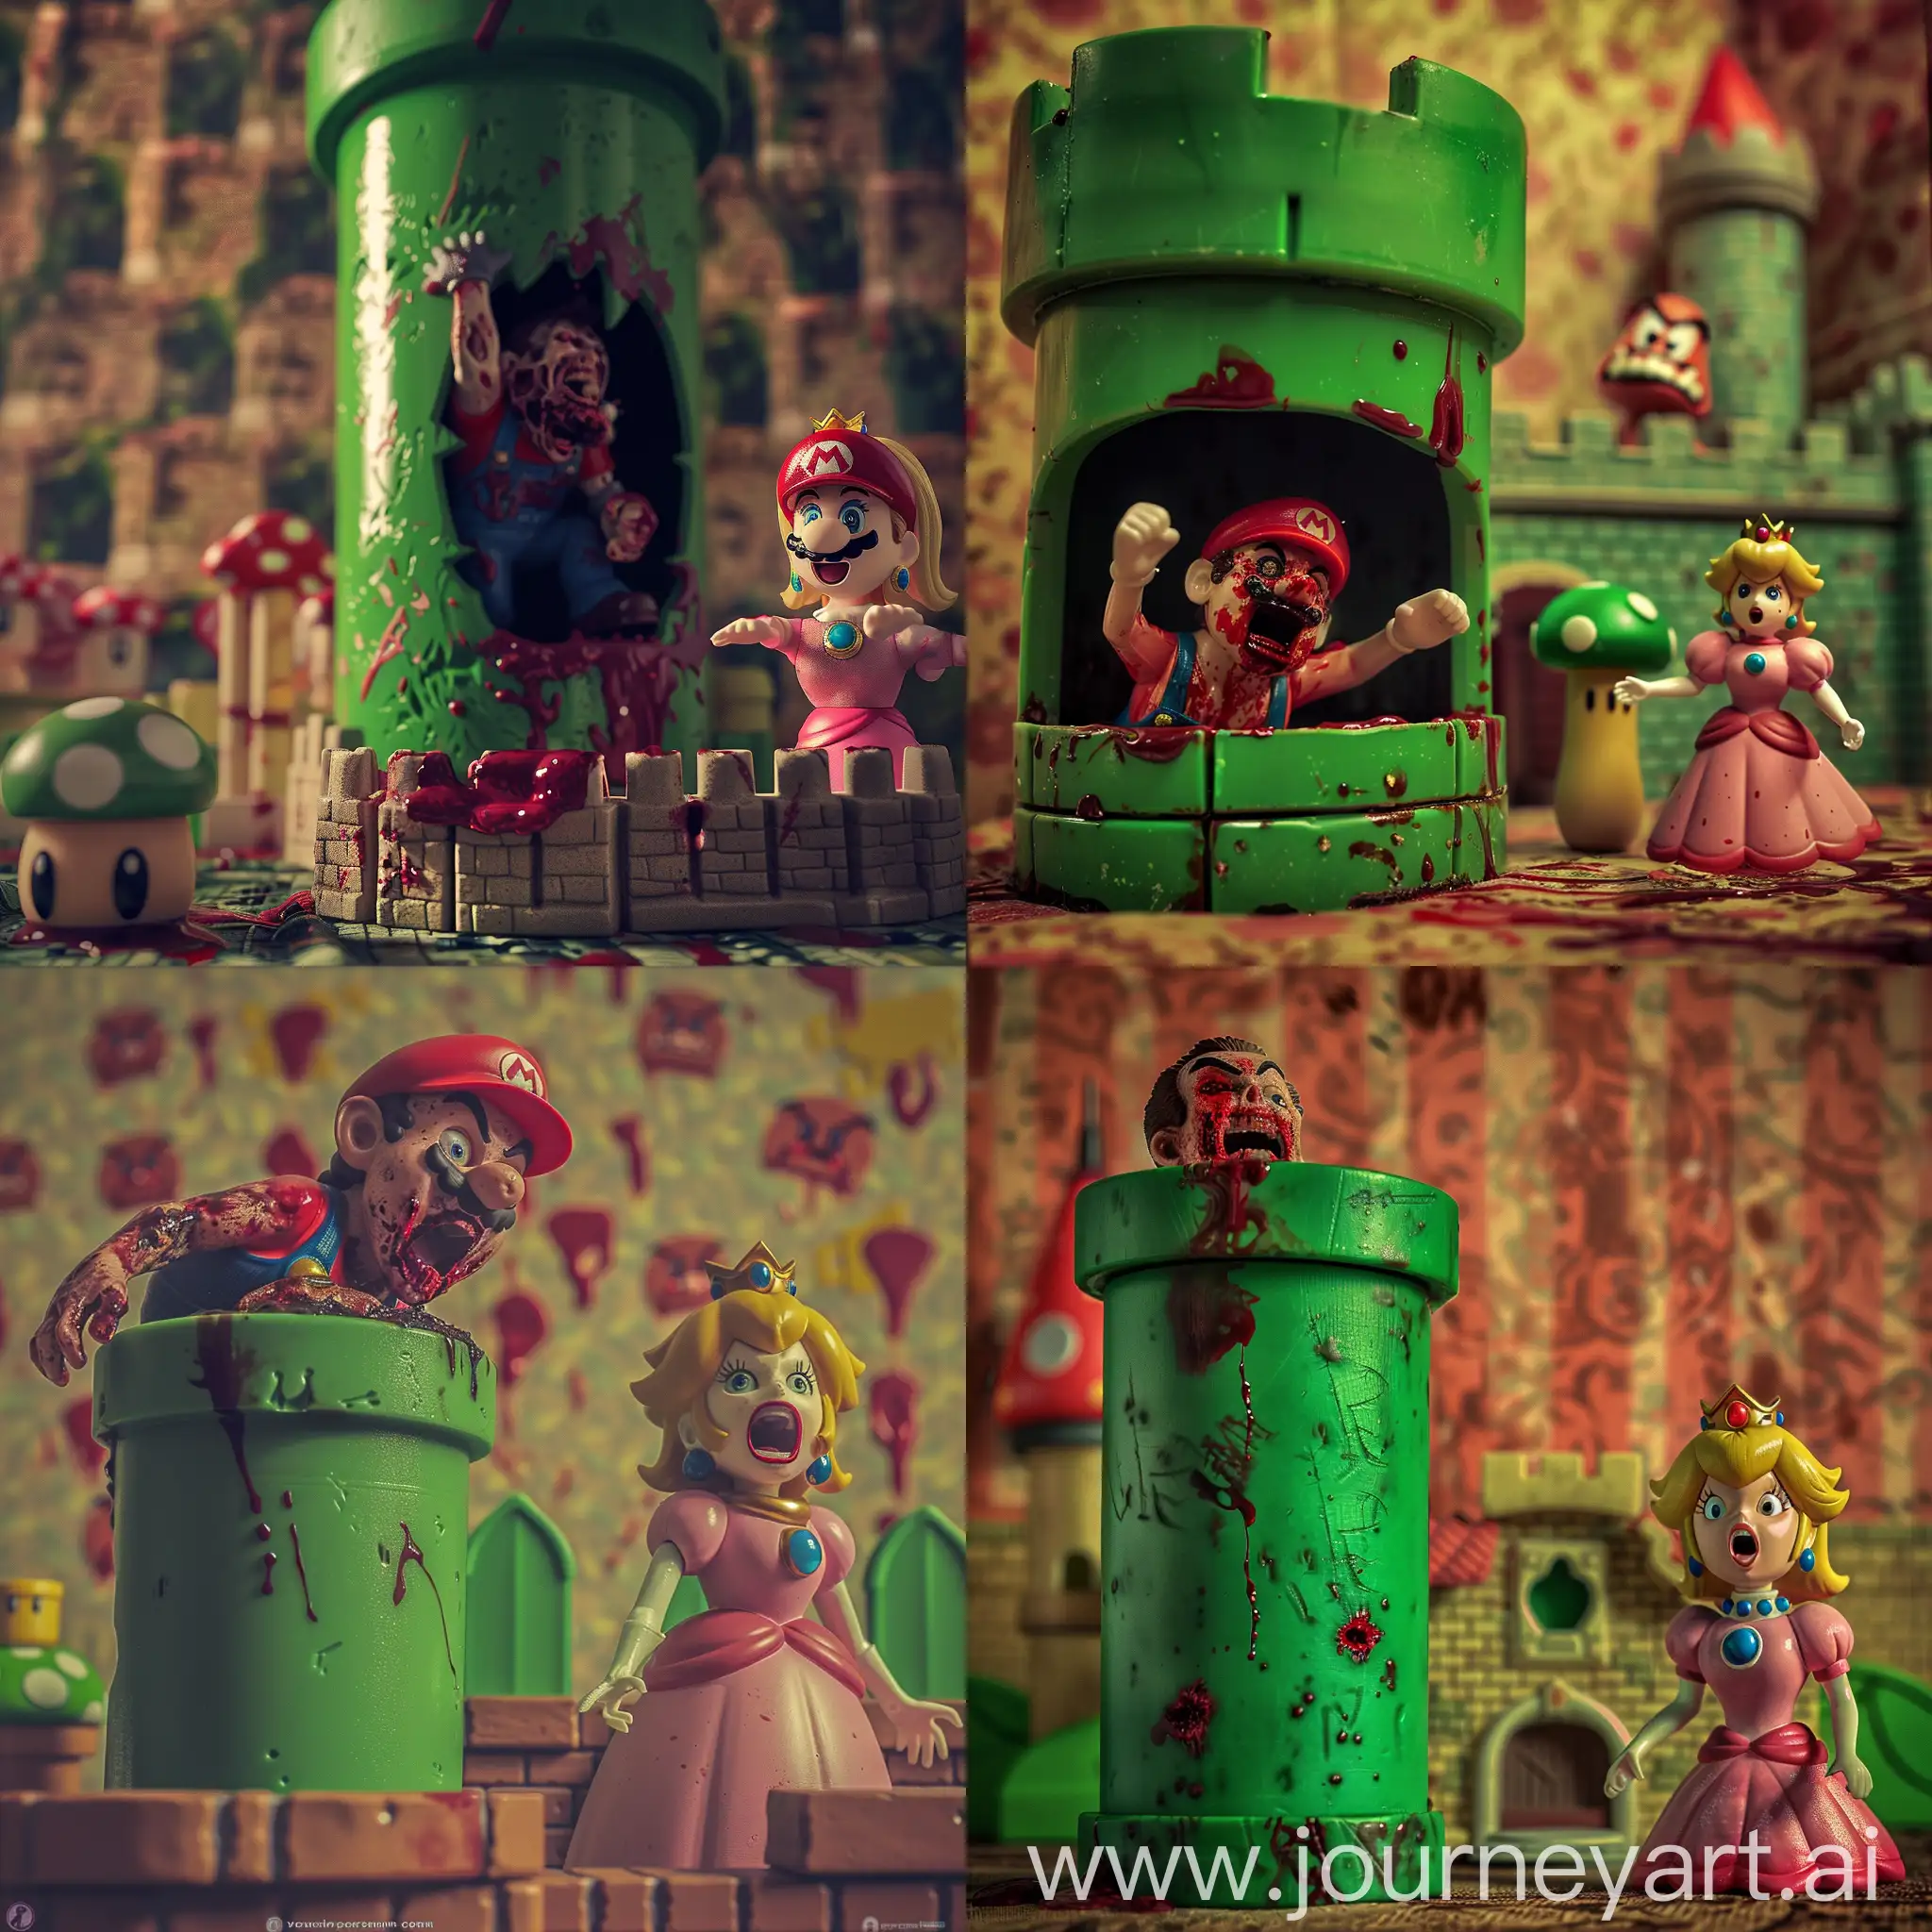 Background: Mario the zombie climbs out of green cylinder, covered in blood. Foreground: Princess Peach Toadstool terrified, scream and cry, the interior of a toy castle, grunge style effect, photo style inspired by 2002 movie The Bell.